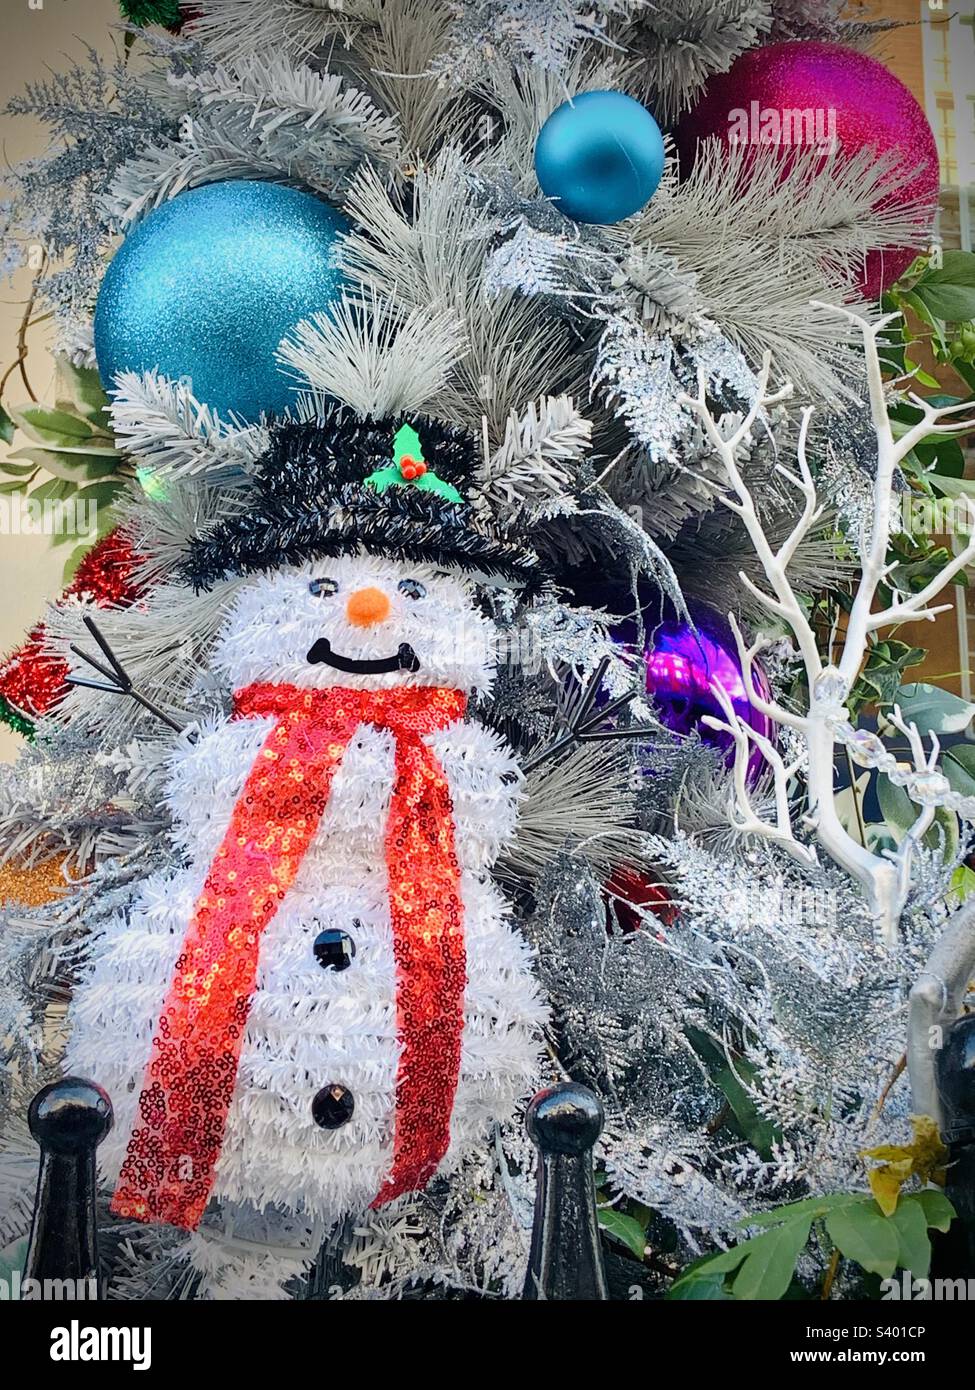 Silver Christmas tree with decorations. Baubles and a snowman hanging from the tree Stock Photo